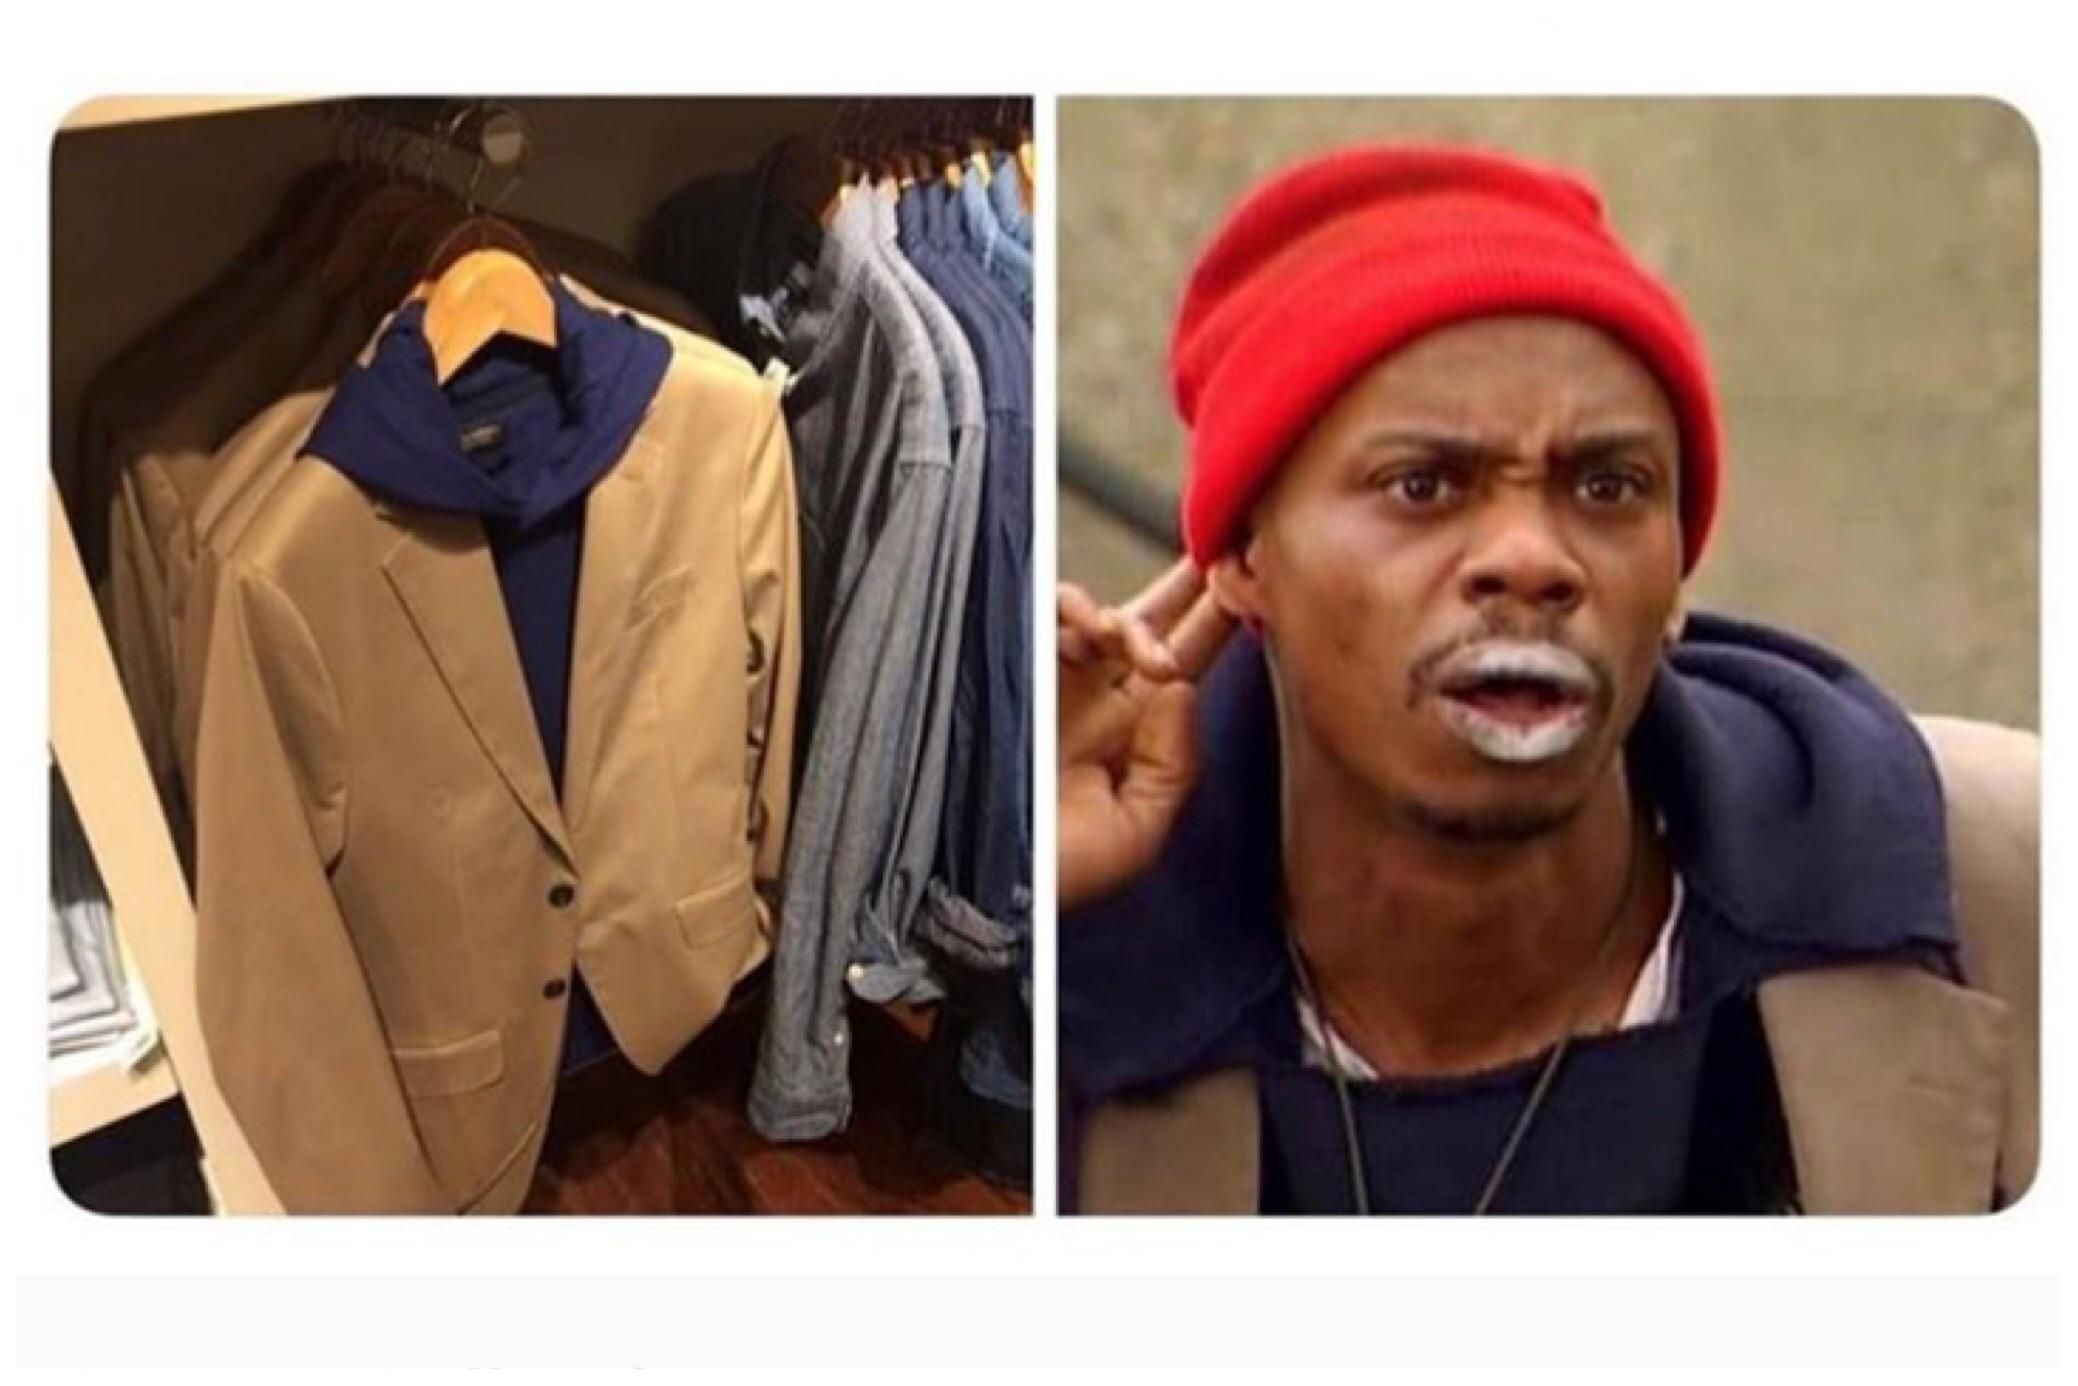 They’re selling Dave Chappelle’s crackhead outfit at Banana Republic.